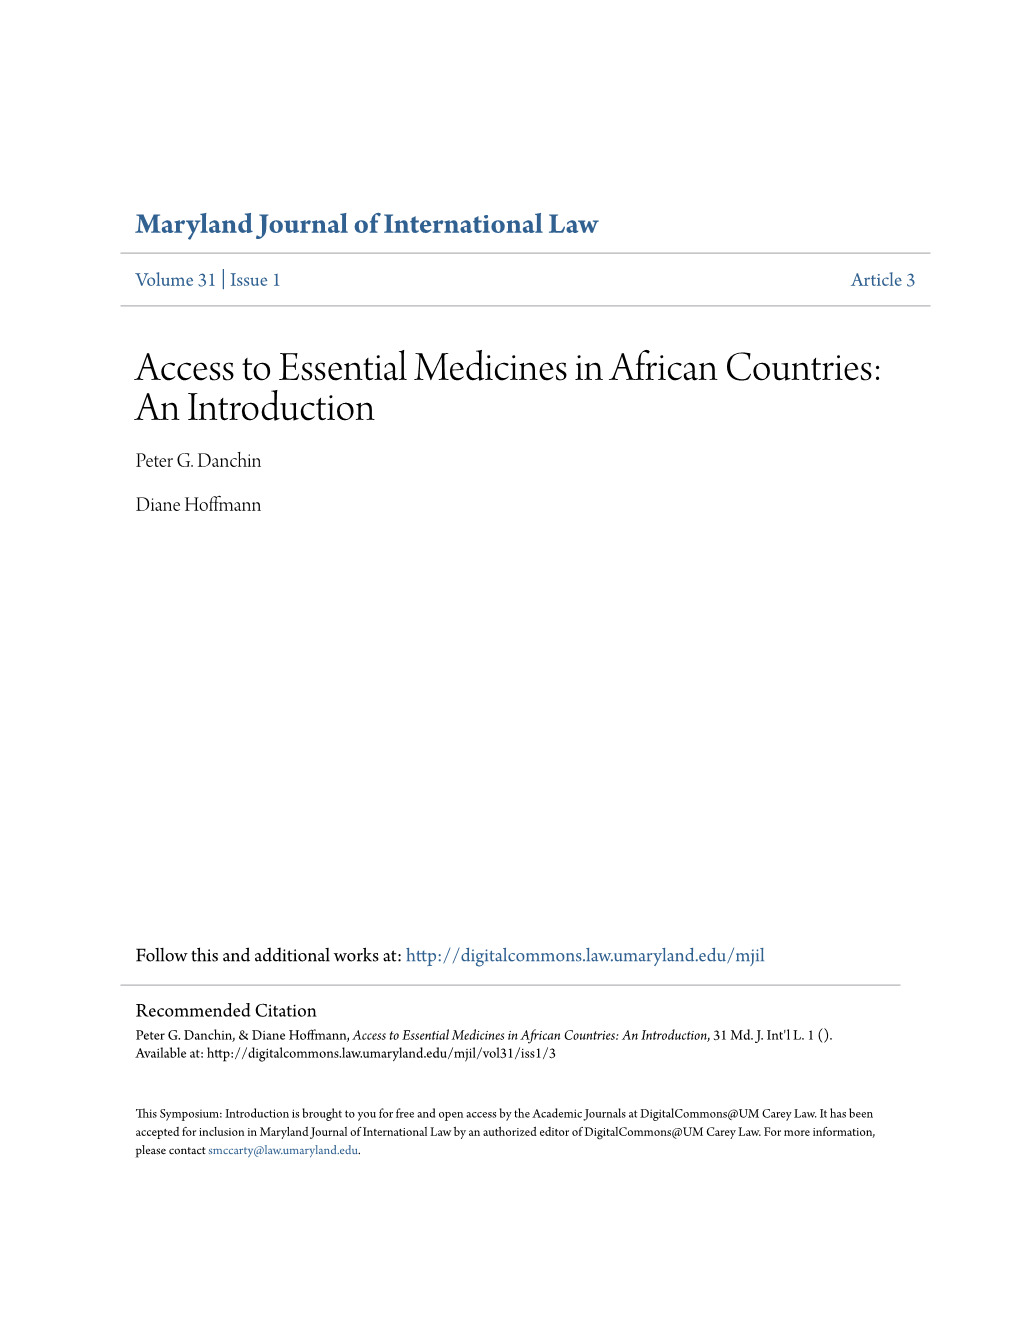 Access to Essential Medicines in African Countries: an Introduction Peter G